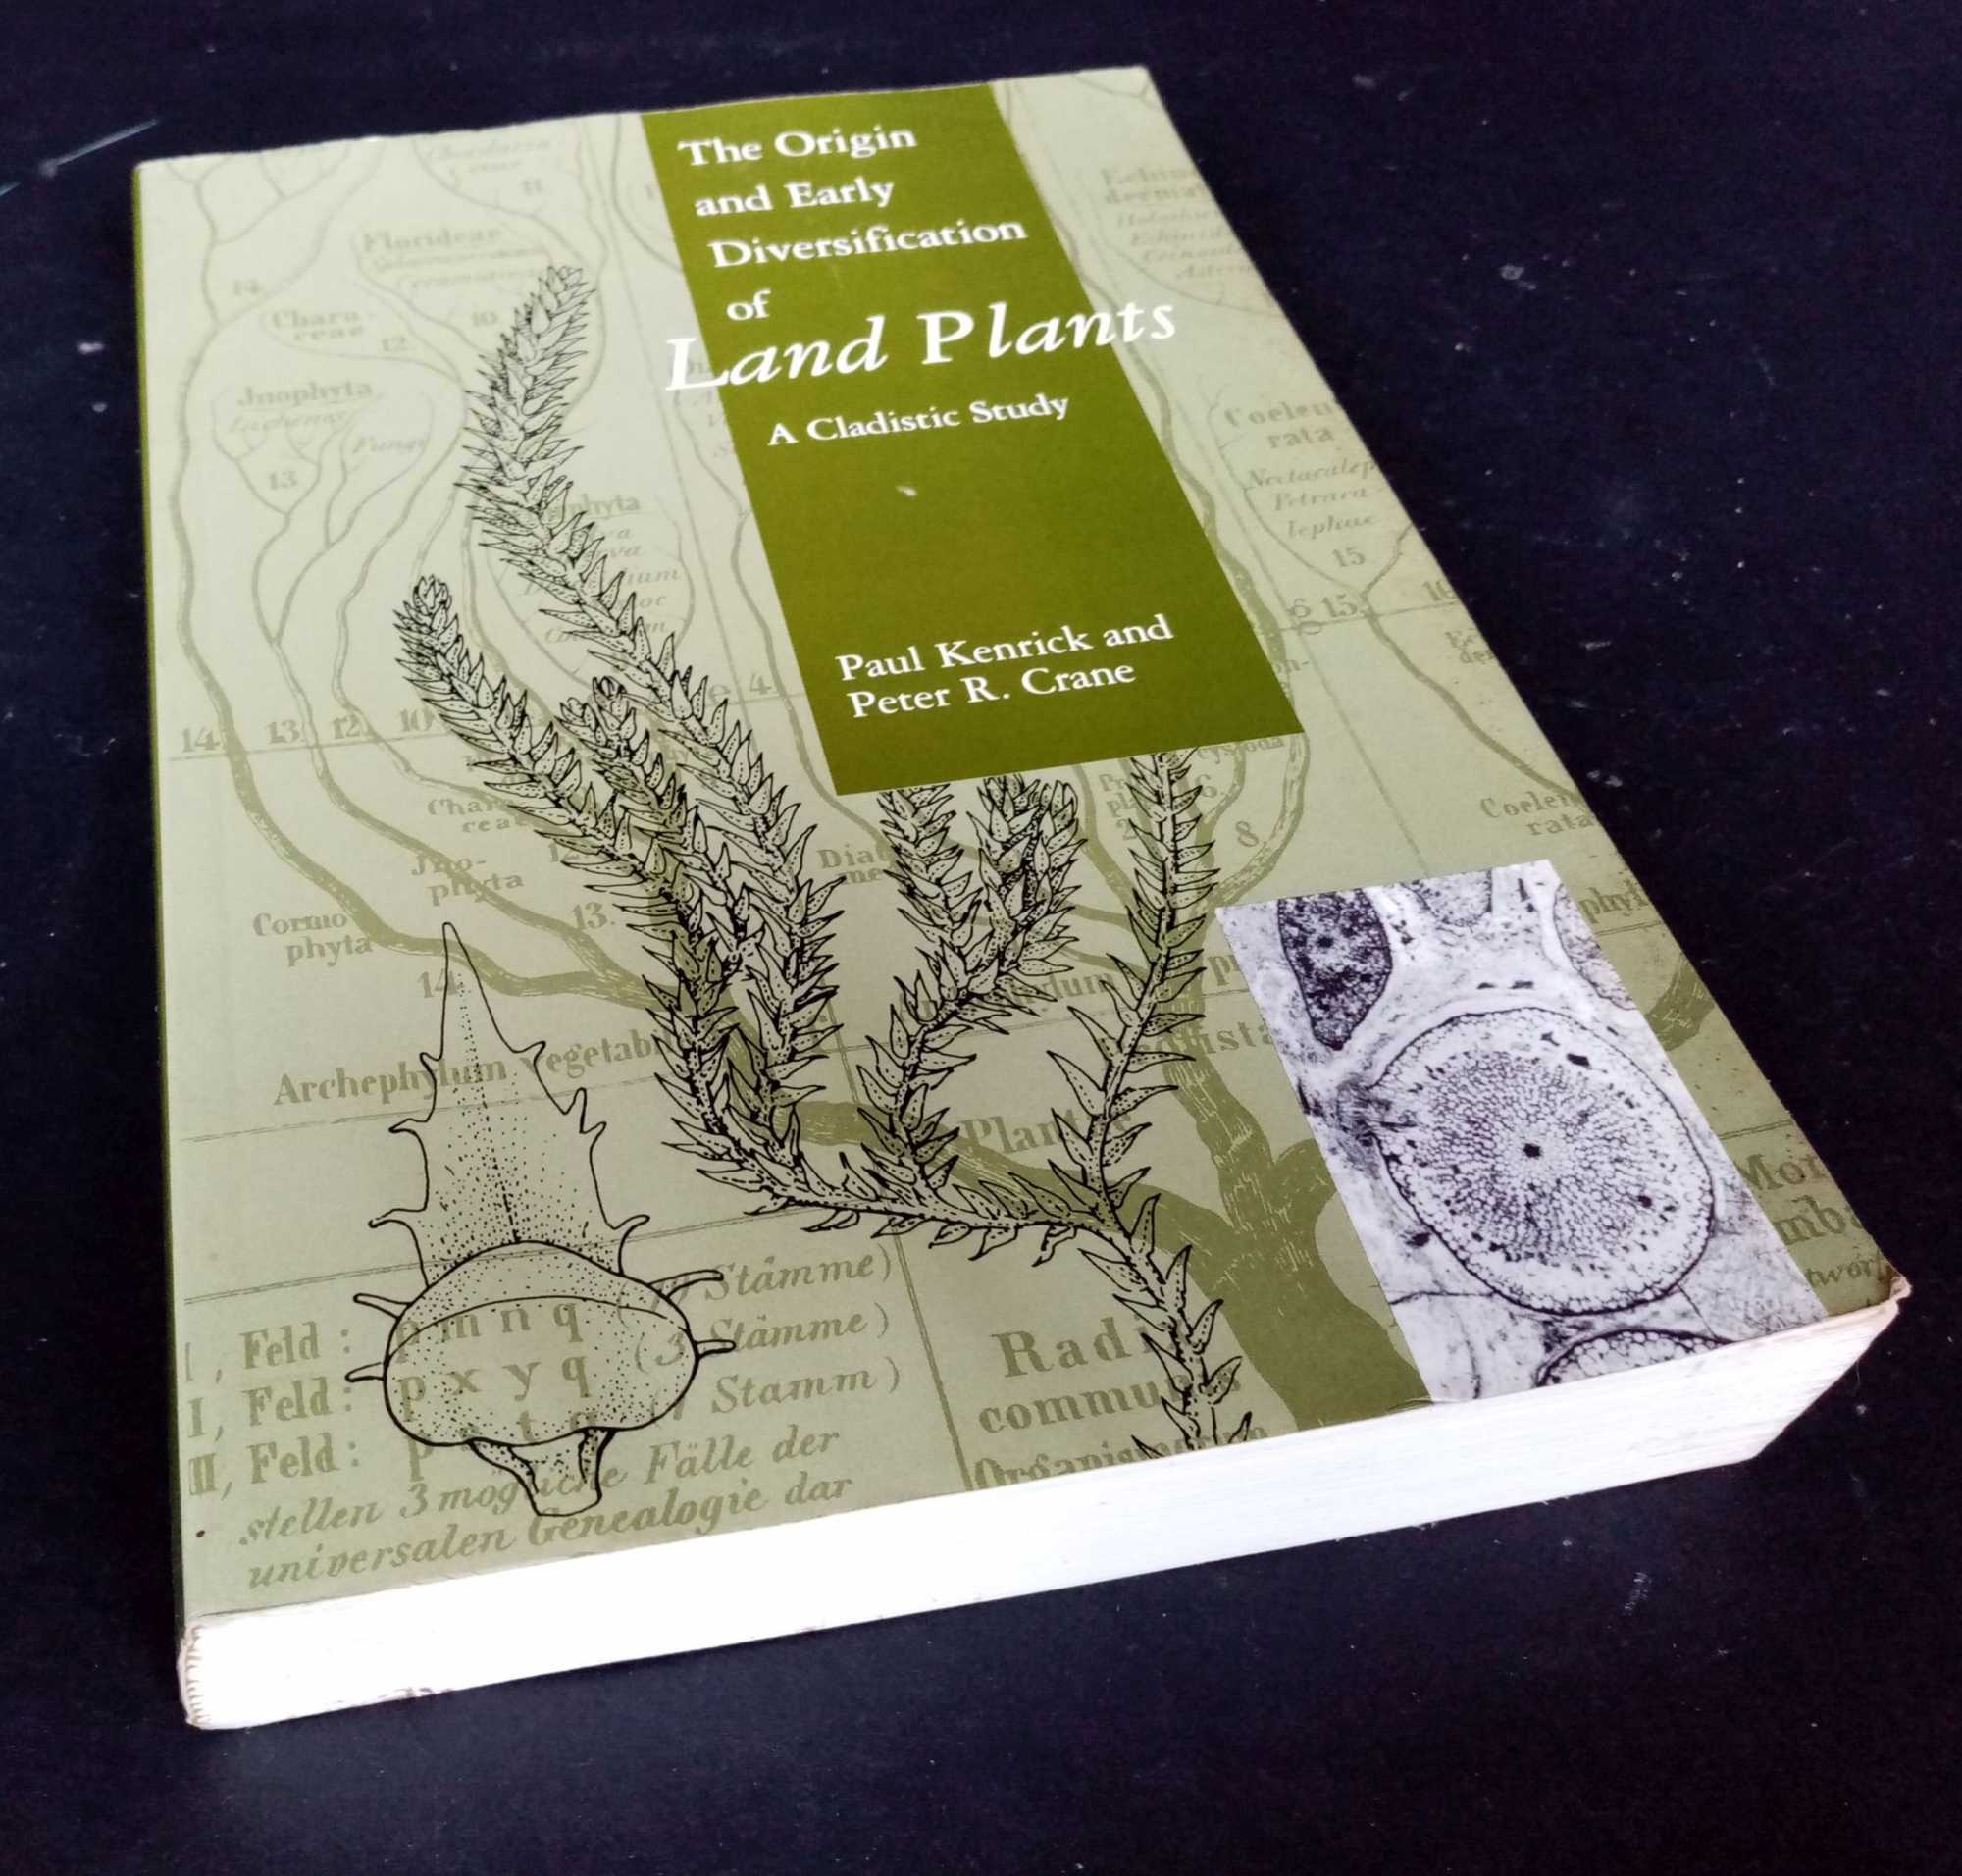 Paul Kenrick - The Origin and Early Diversification of Land Plants: A Cladistic Story